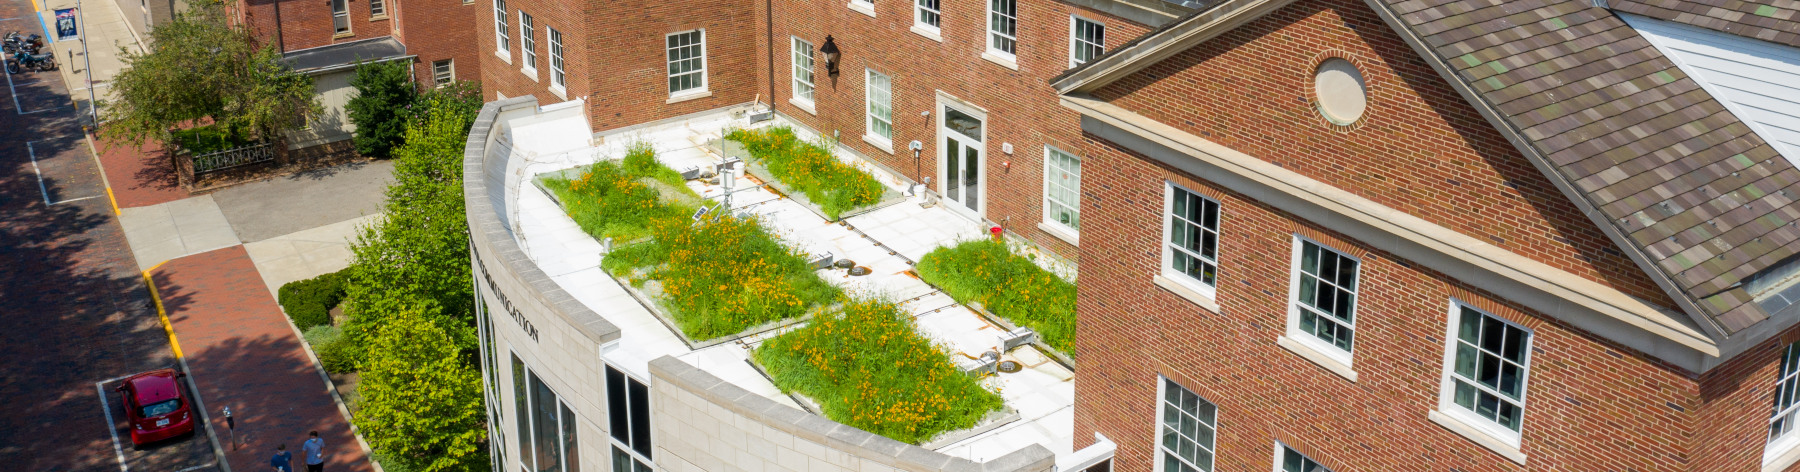 Green Roof Drone Image